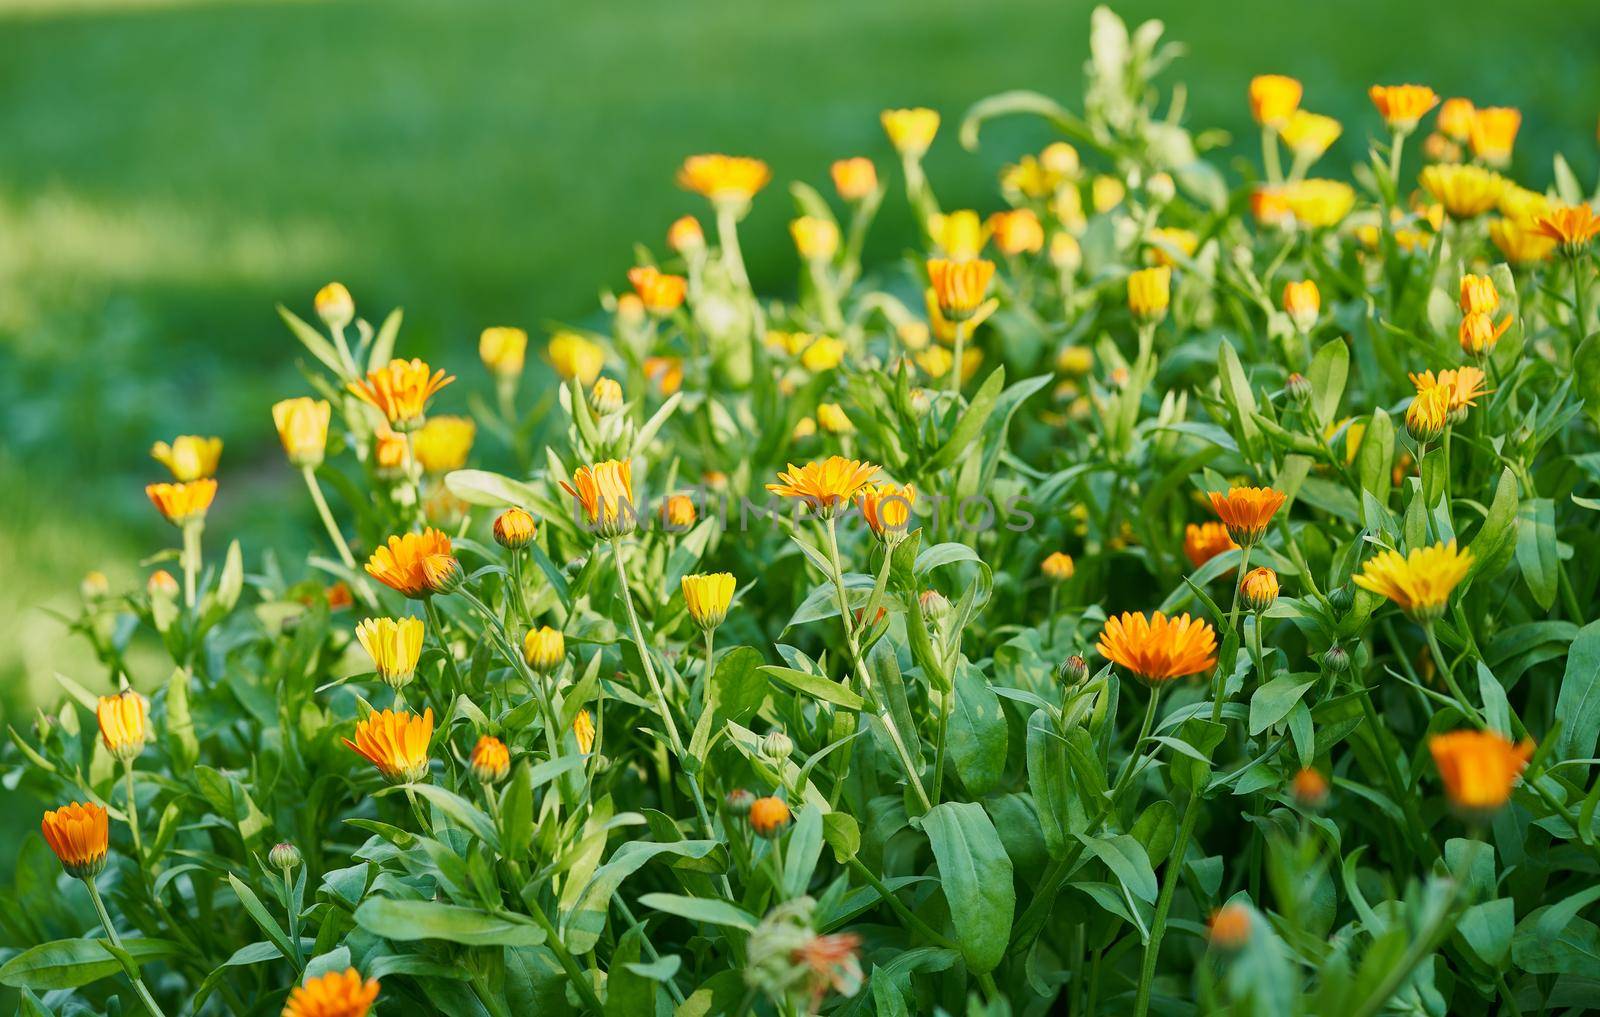 Flowerbed with marigold flowers. Valuable medicinal large lush plants. Summer day, garden in sunlight